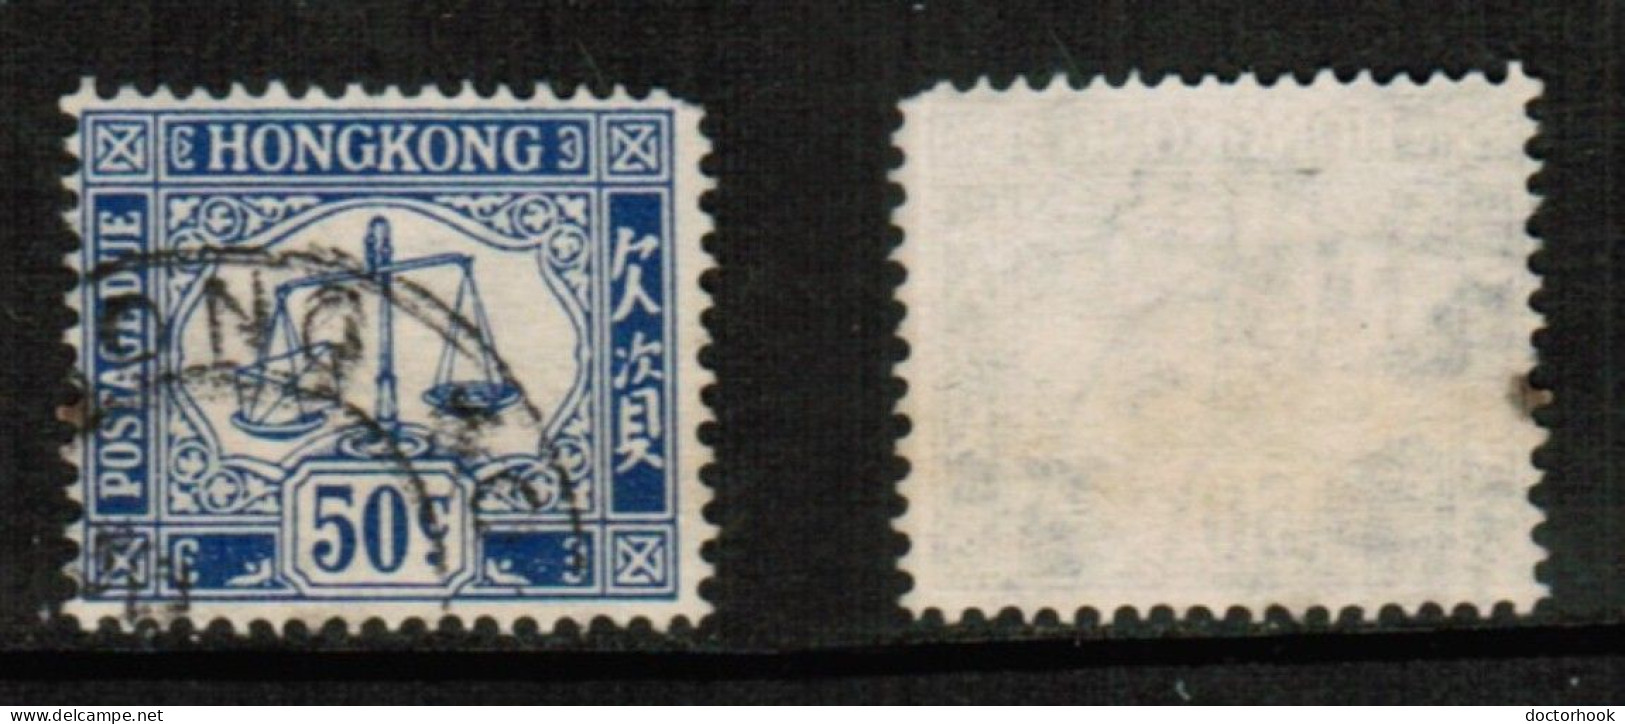 HONG KONG   Scott # J 12 USED (CONDITION AS PER SCAN) (Stamp Scan # 924-6) - Strafport